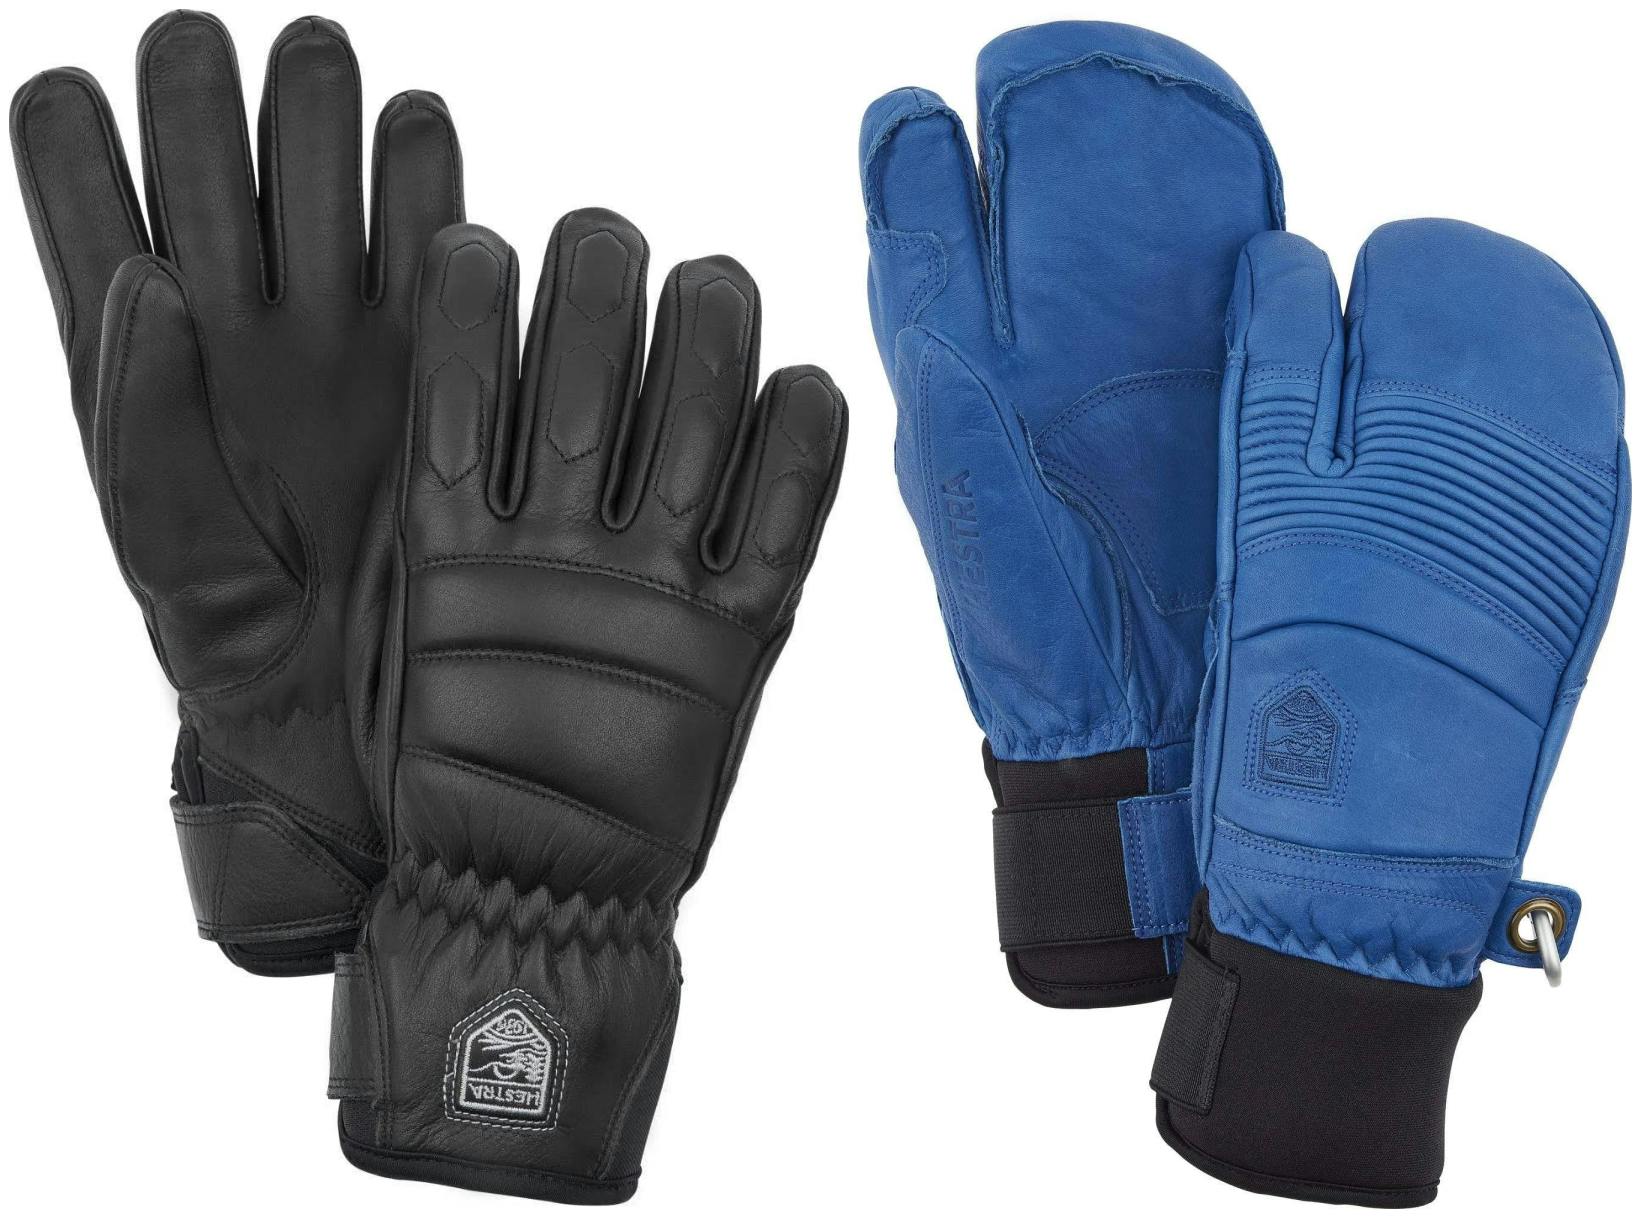 Two pairs of ski gloves. One is black while the other is blue and mitten-style